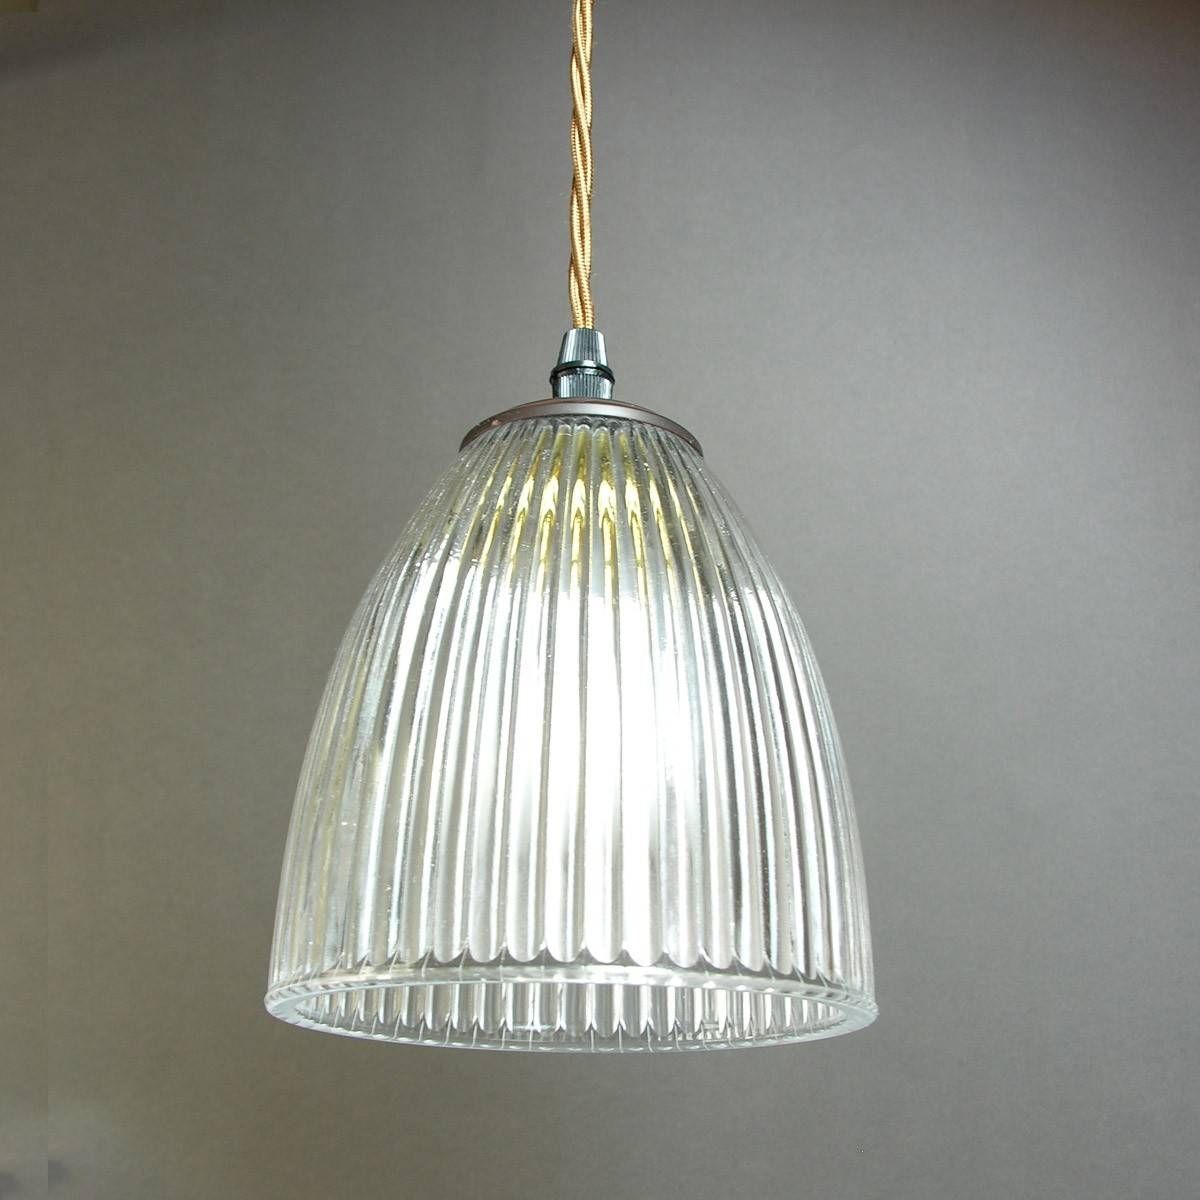 Prismatic Lighting – Lighting Intended For Tiny Pendant Lights (View 8 of 15)